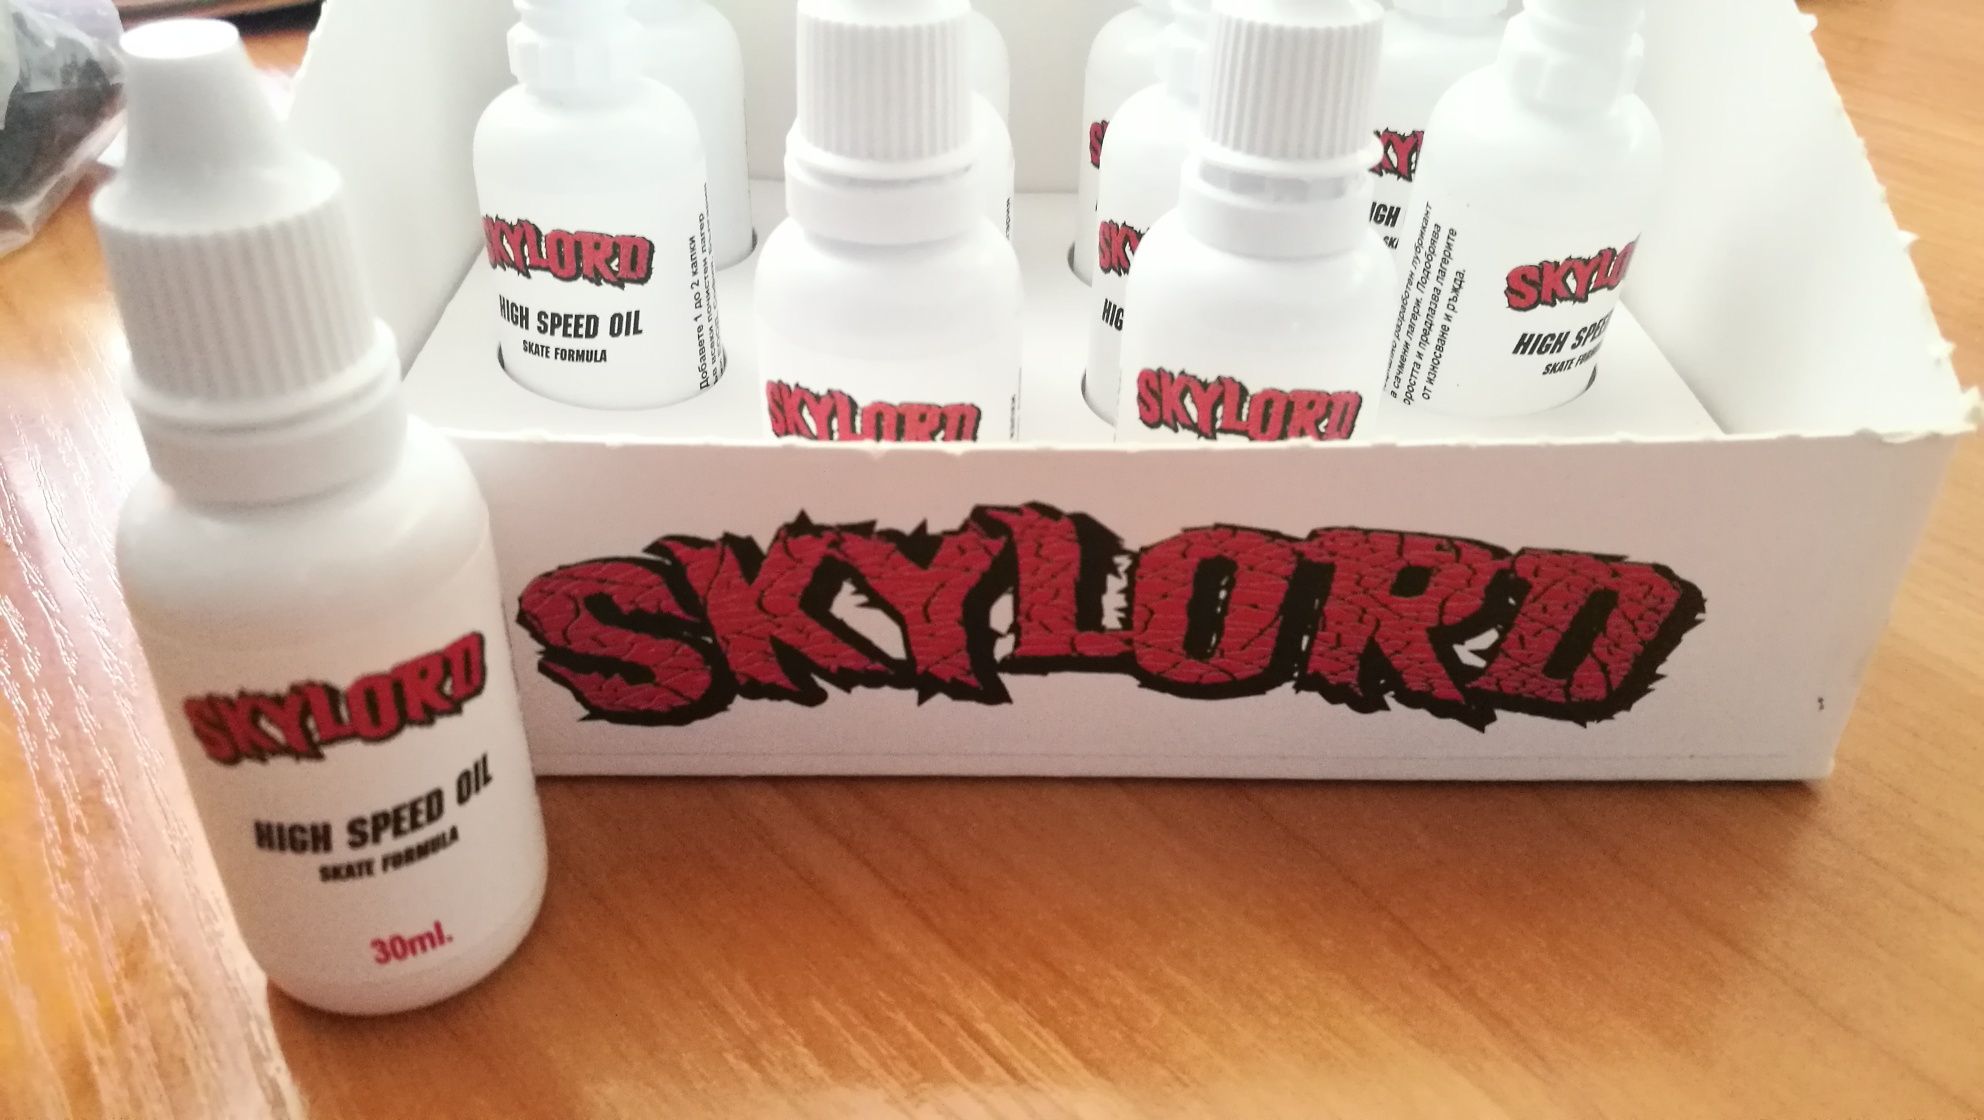 Skylord  high speed oil смазка, масло за лагери за скейтборд и ролери